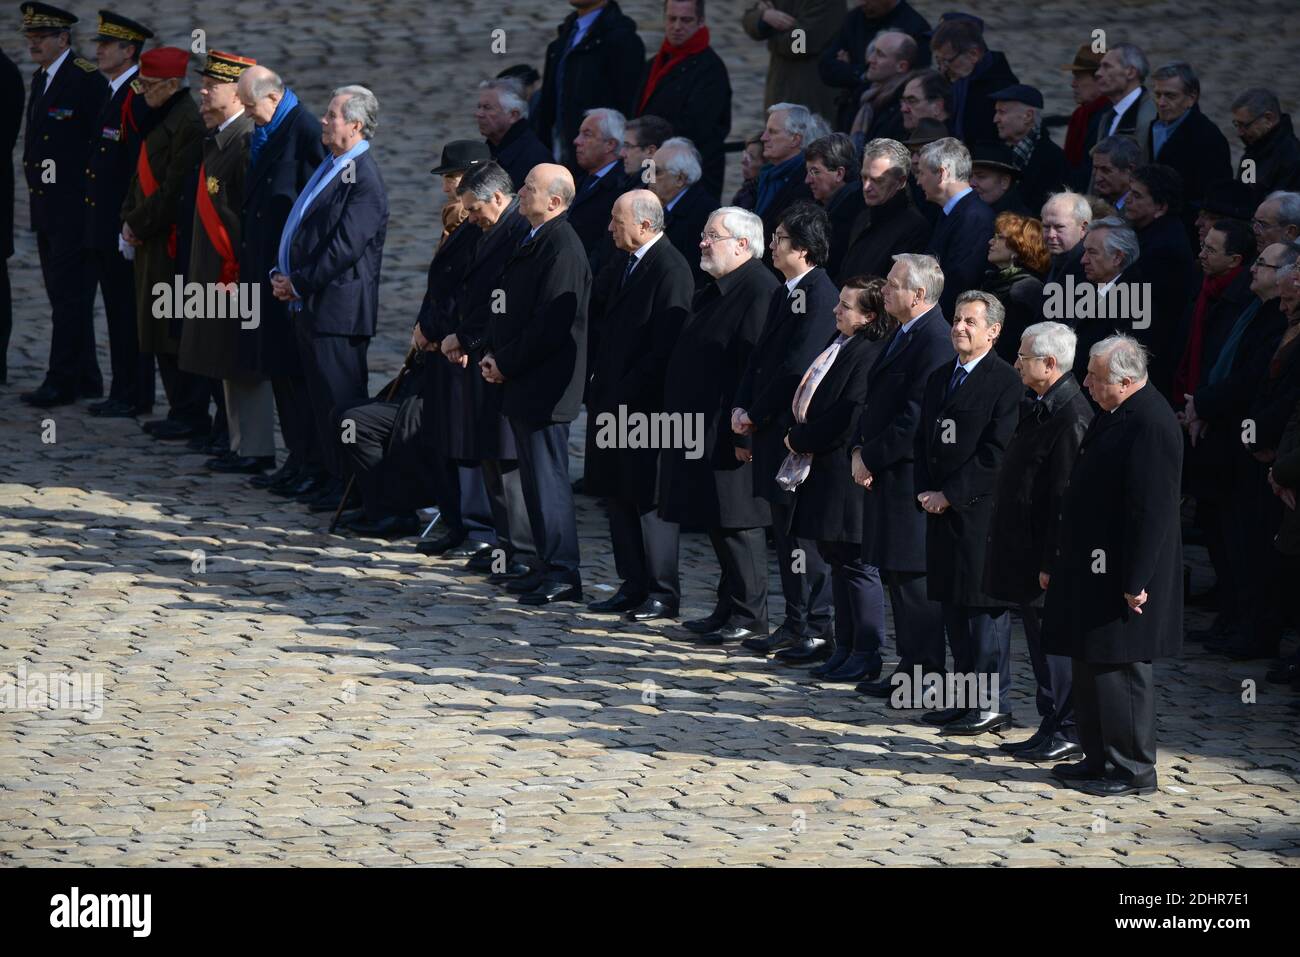 L-R : Jean-Louis Debre, Roland Dumas, Robert Badinter, Francois Fillon, Alain Juppe, Laurent Fabius, Jean-Marc Todeschini, Jean-Vincent Place, Emmanuelle Cosse, Jean-Marc Ayrault, Nicolas Sarkozy, Claude Bartolone, Gerard Larcher attend national tribute to Yves Guena, in the courtyard of the Invalides, in Paris, France on March 8, 2016. Photo by Ammar Abd Rabbo/ABACAPRESS.COM Stock Photo